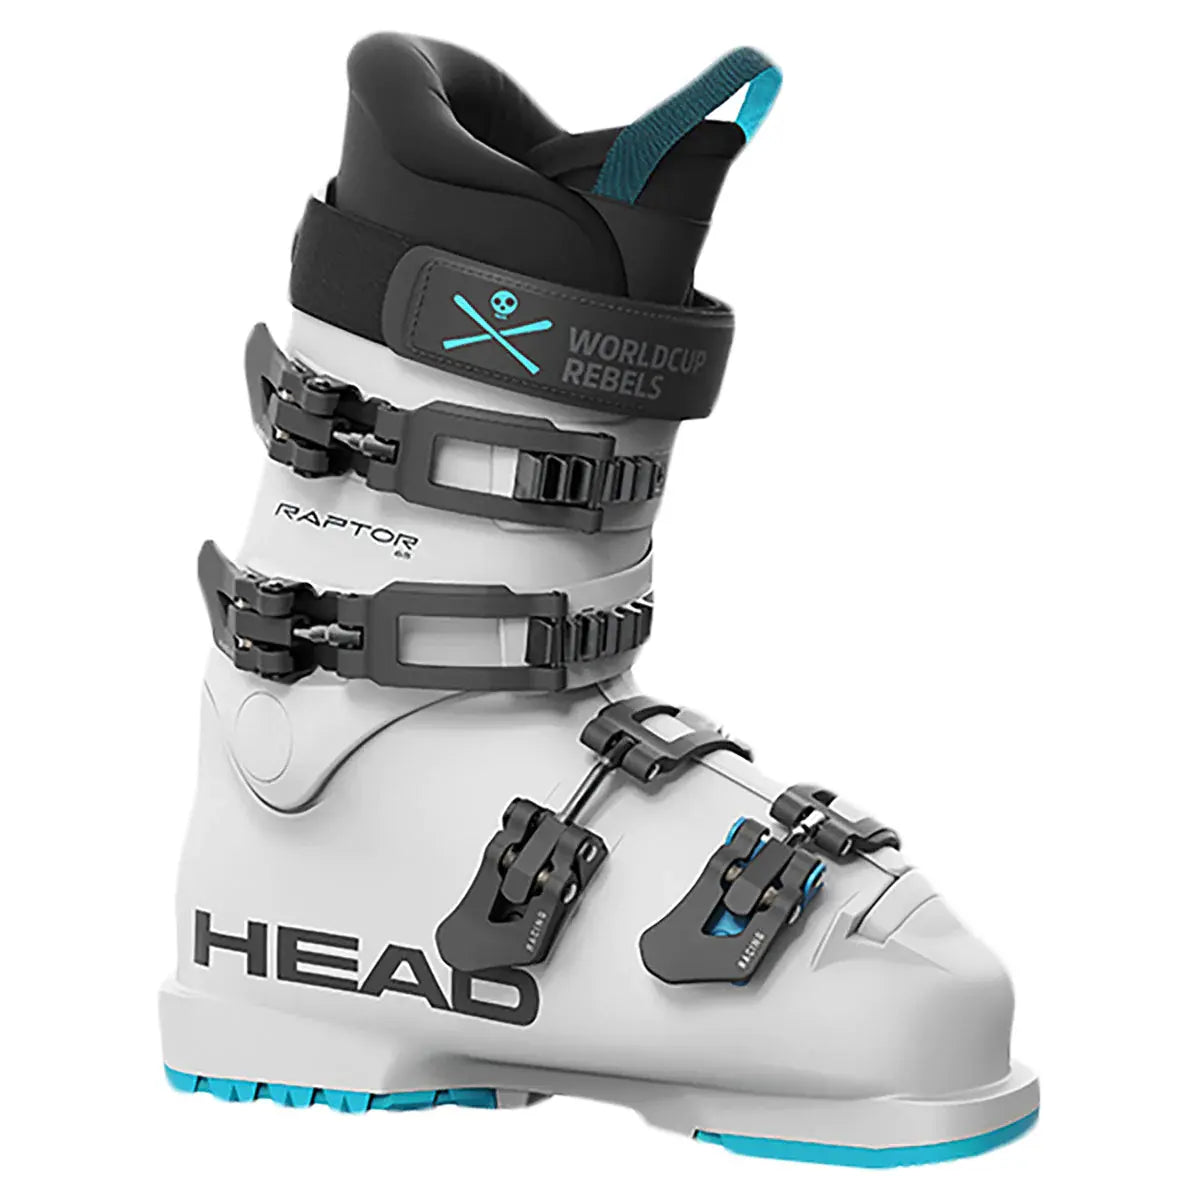 The Head Raptor 65 is a great kid's ski boot in white with a teal blue outsole